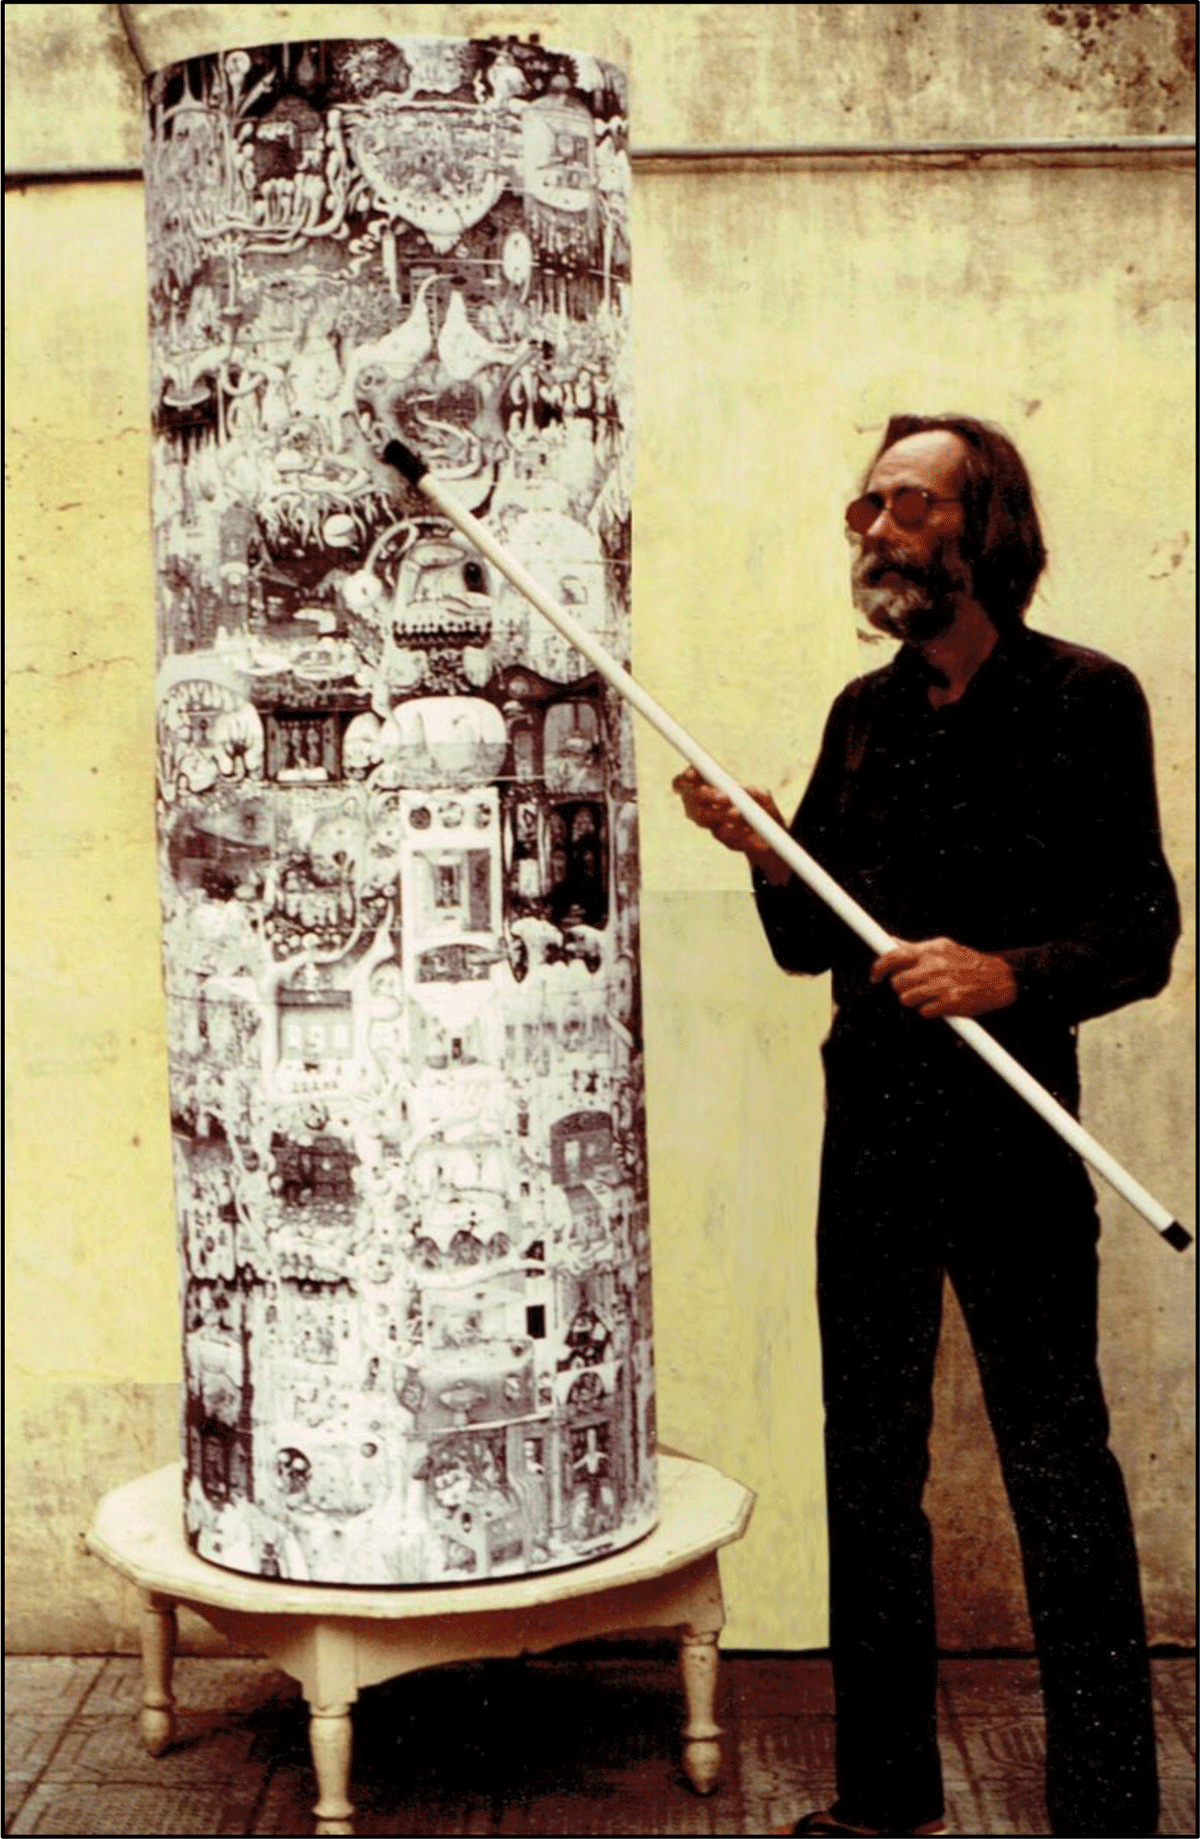 Deluz posing as a bard next to the cylinder. Picture taken by Christophe Deluz around 1988. JJD archive fonds. Algiers Diocesan Study Centre. Unclassified